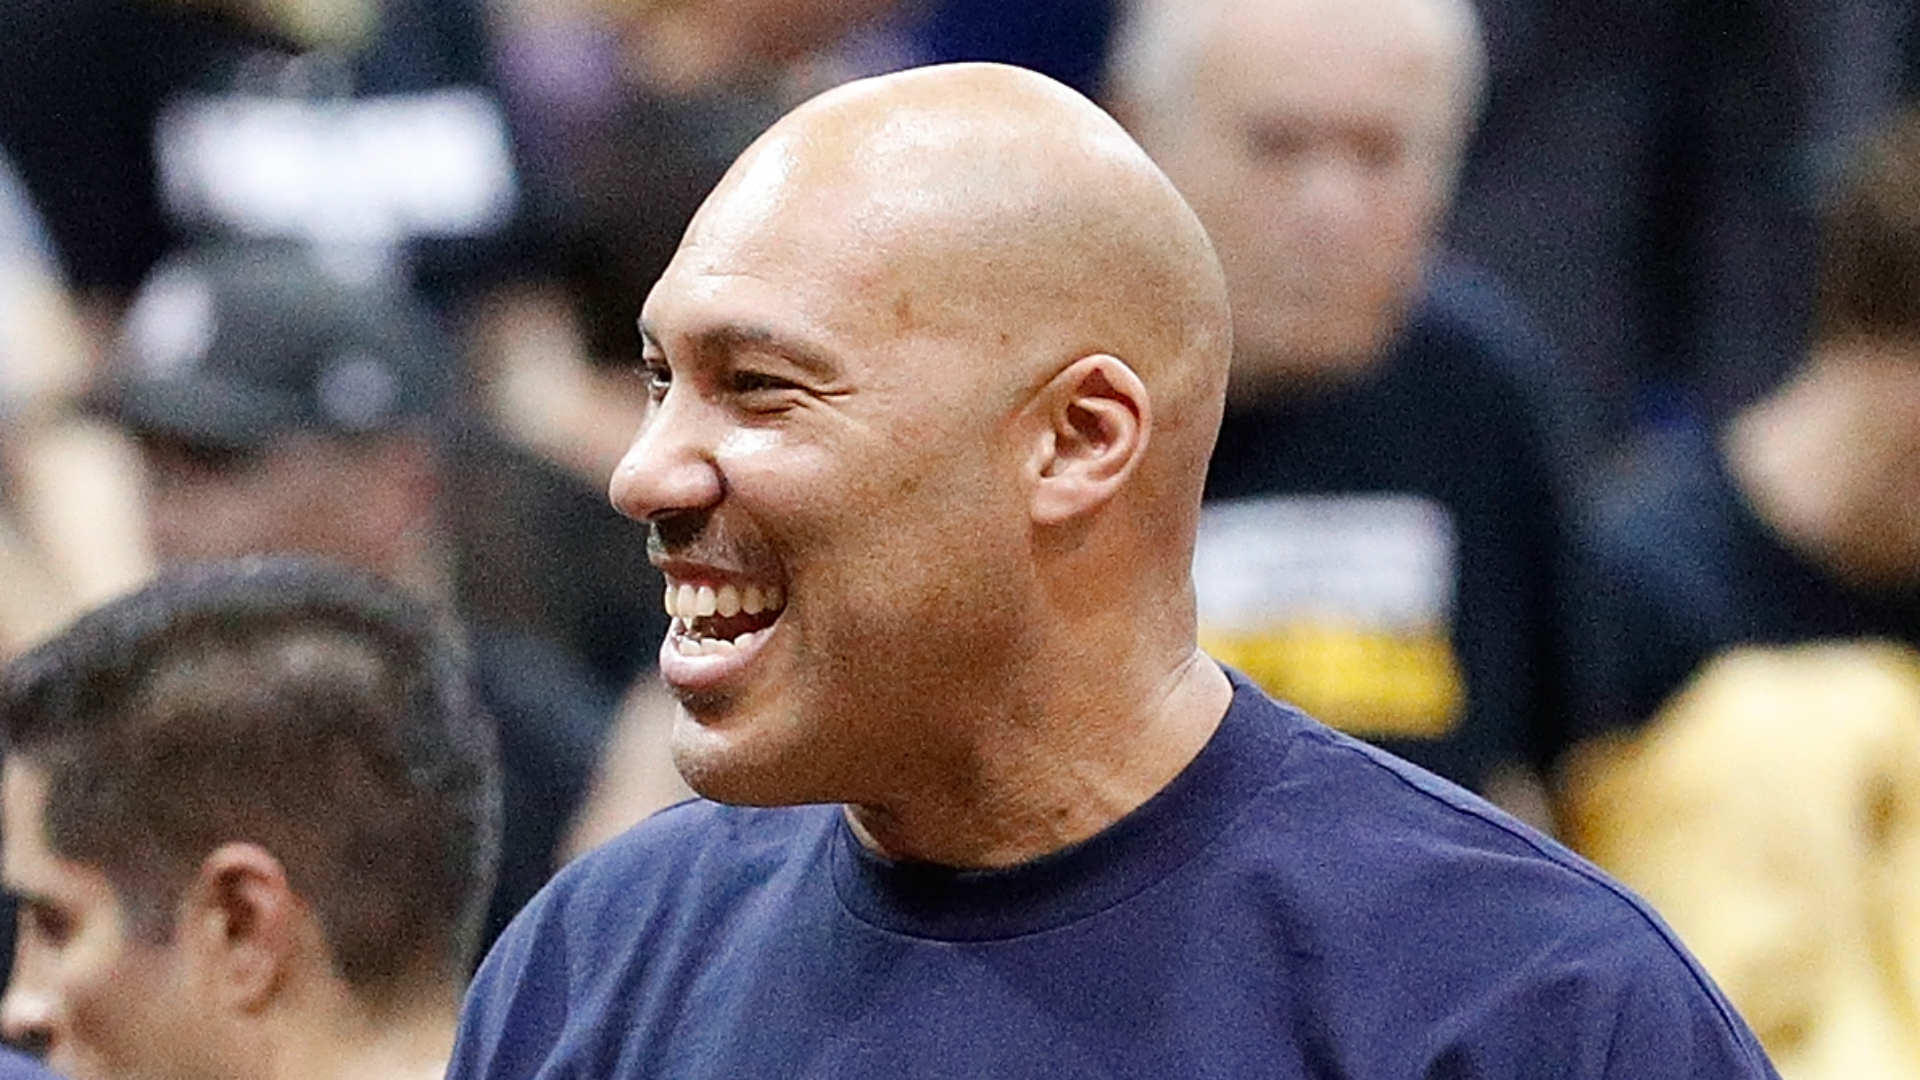 LaVar Ball Gives Halftime Speech To His AAU Team